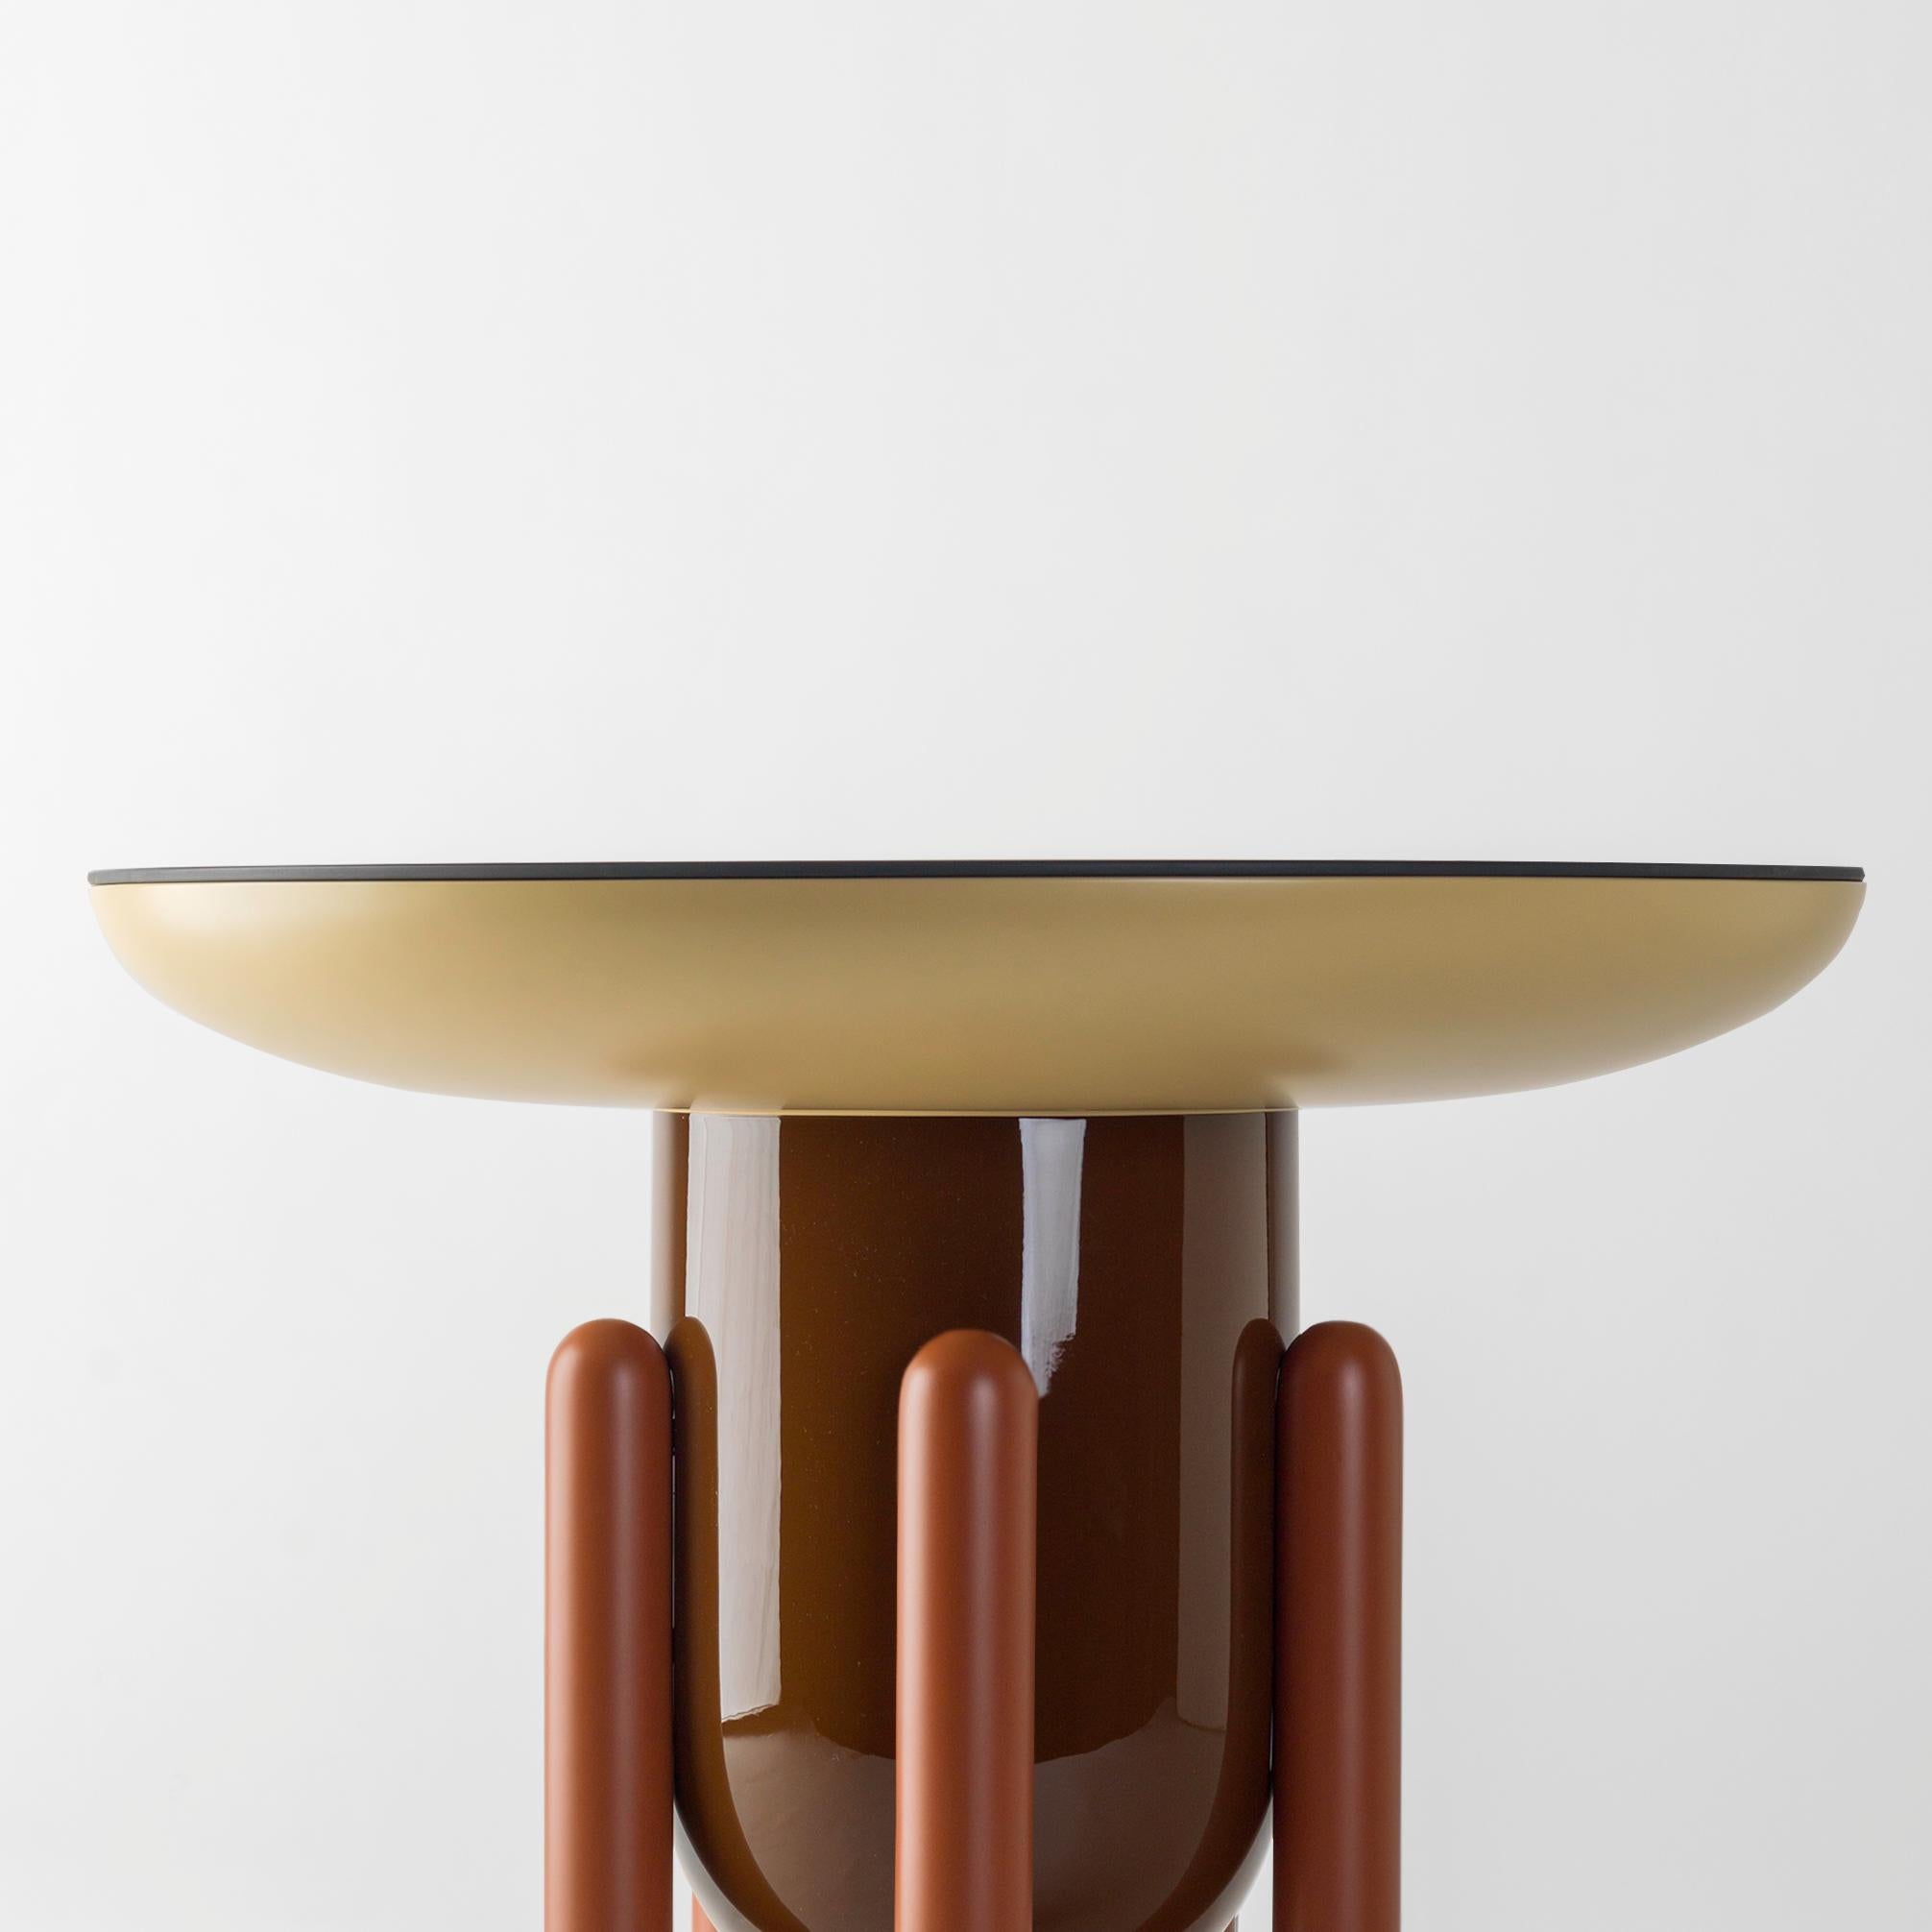 Multicolor explorer #02 table

Design by Jaime Hayon, 2019
Manufactured by BD Barcelona.

Laquered fibreglass body. Solid turned wooden legs and lacquered. Painted glass table top.

Measure: 60 Ø x 46 cm

- Glass: RAL 7021
- Top: RAL 1001